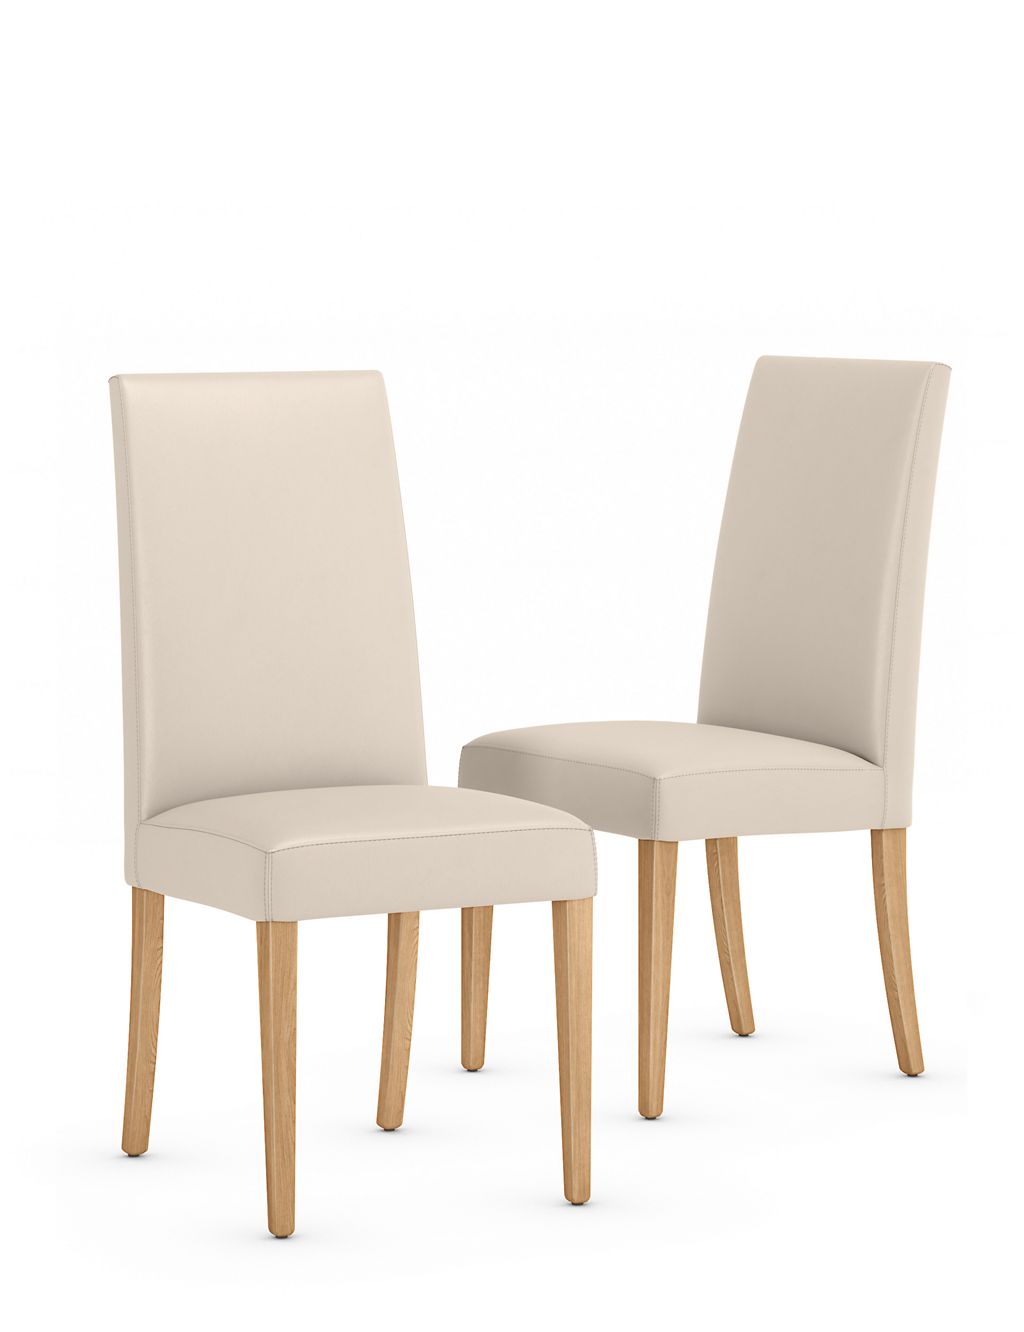 Set of 2 Alton Faux Leather Dining Chairs 1 of 6